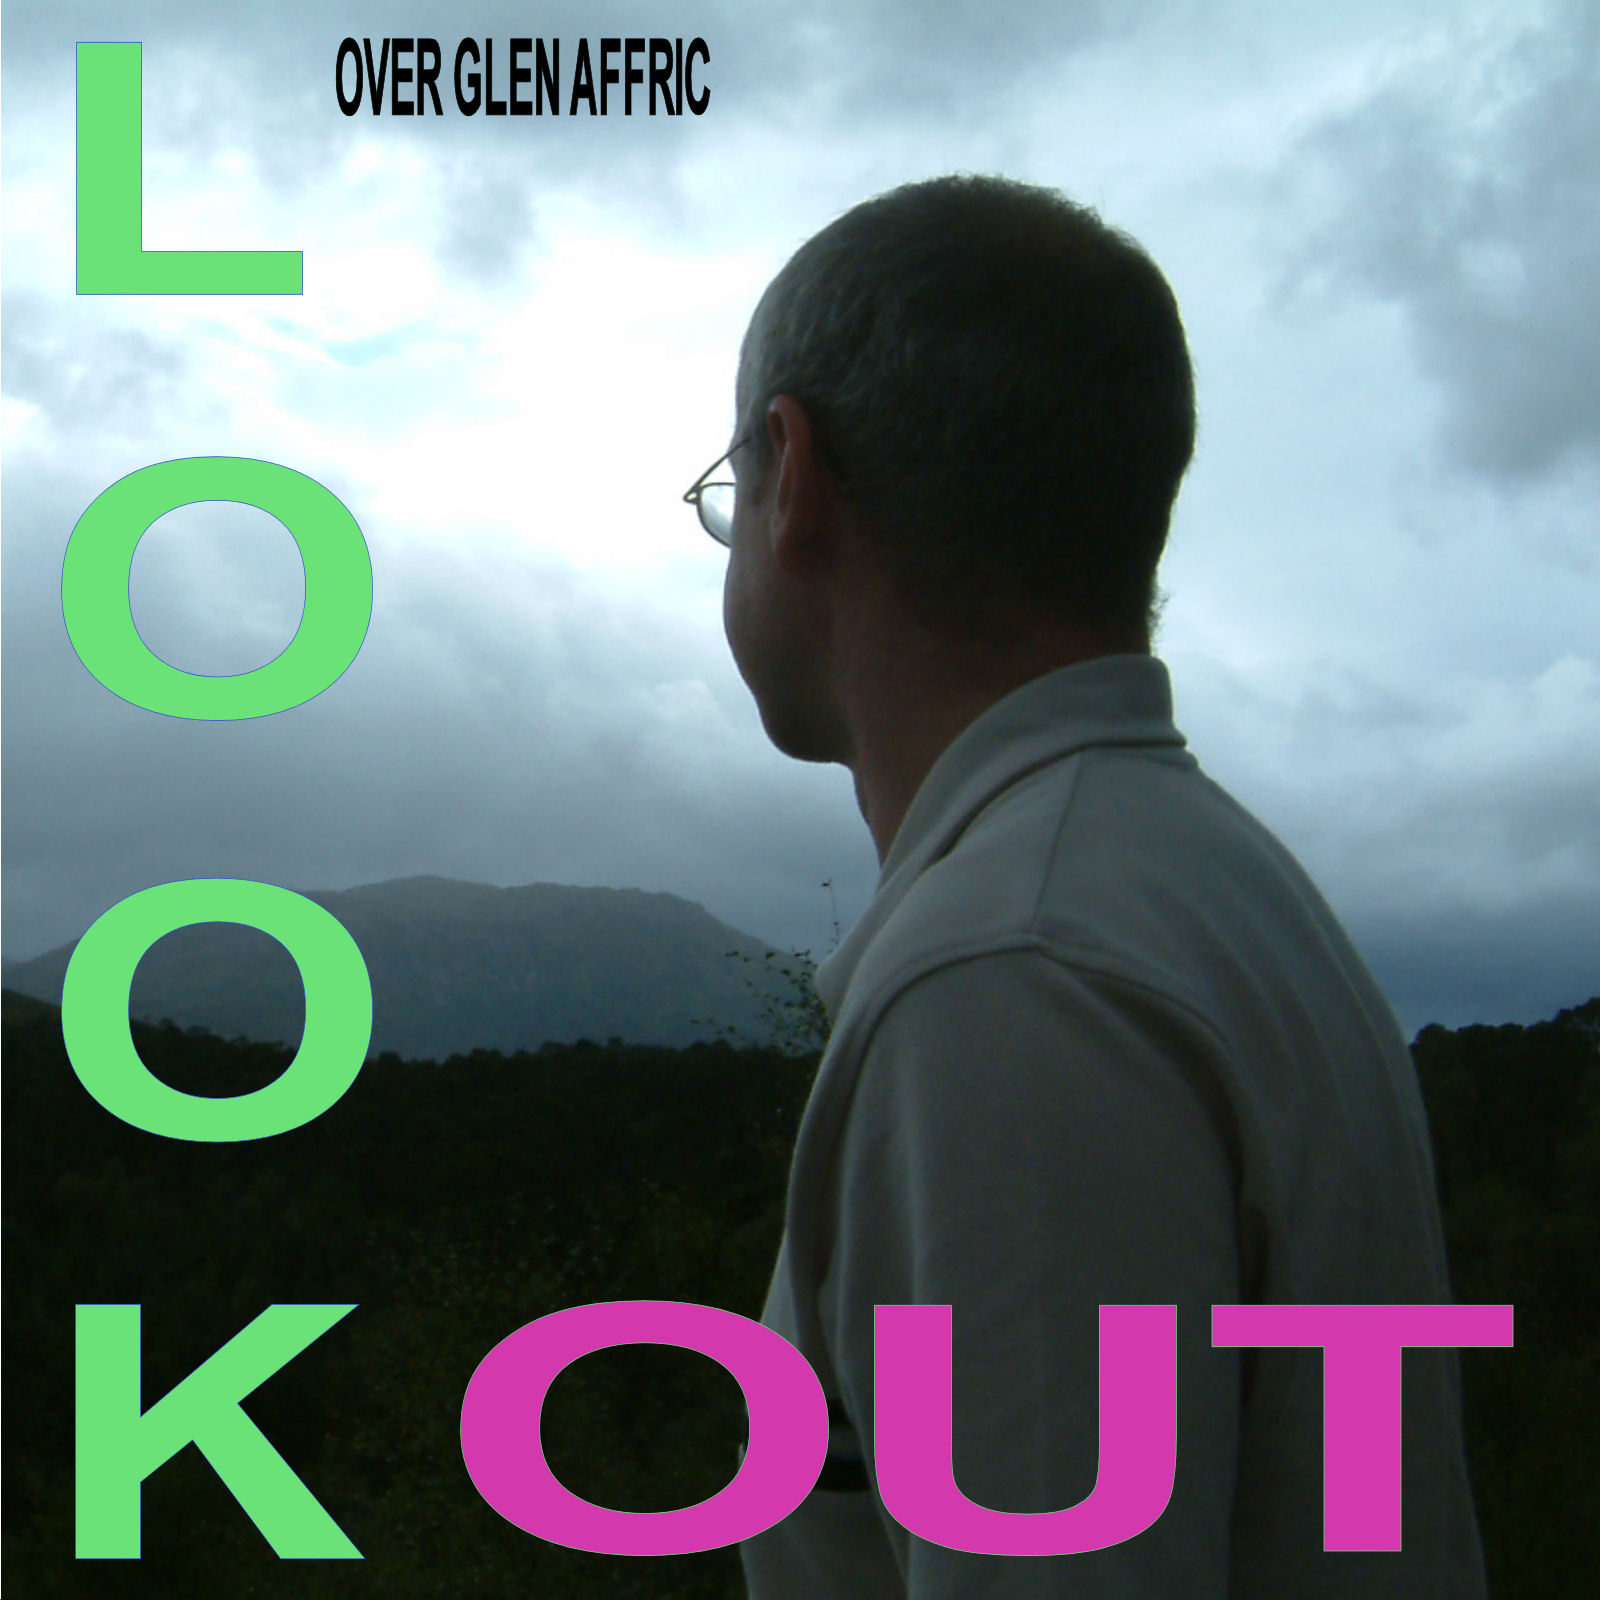 [Look+Out+over+Glen+Affric.jpg]